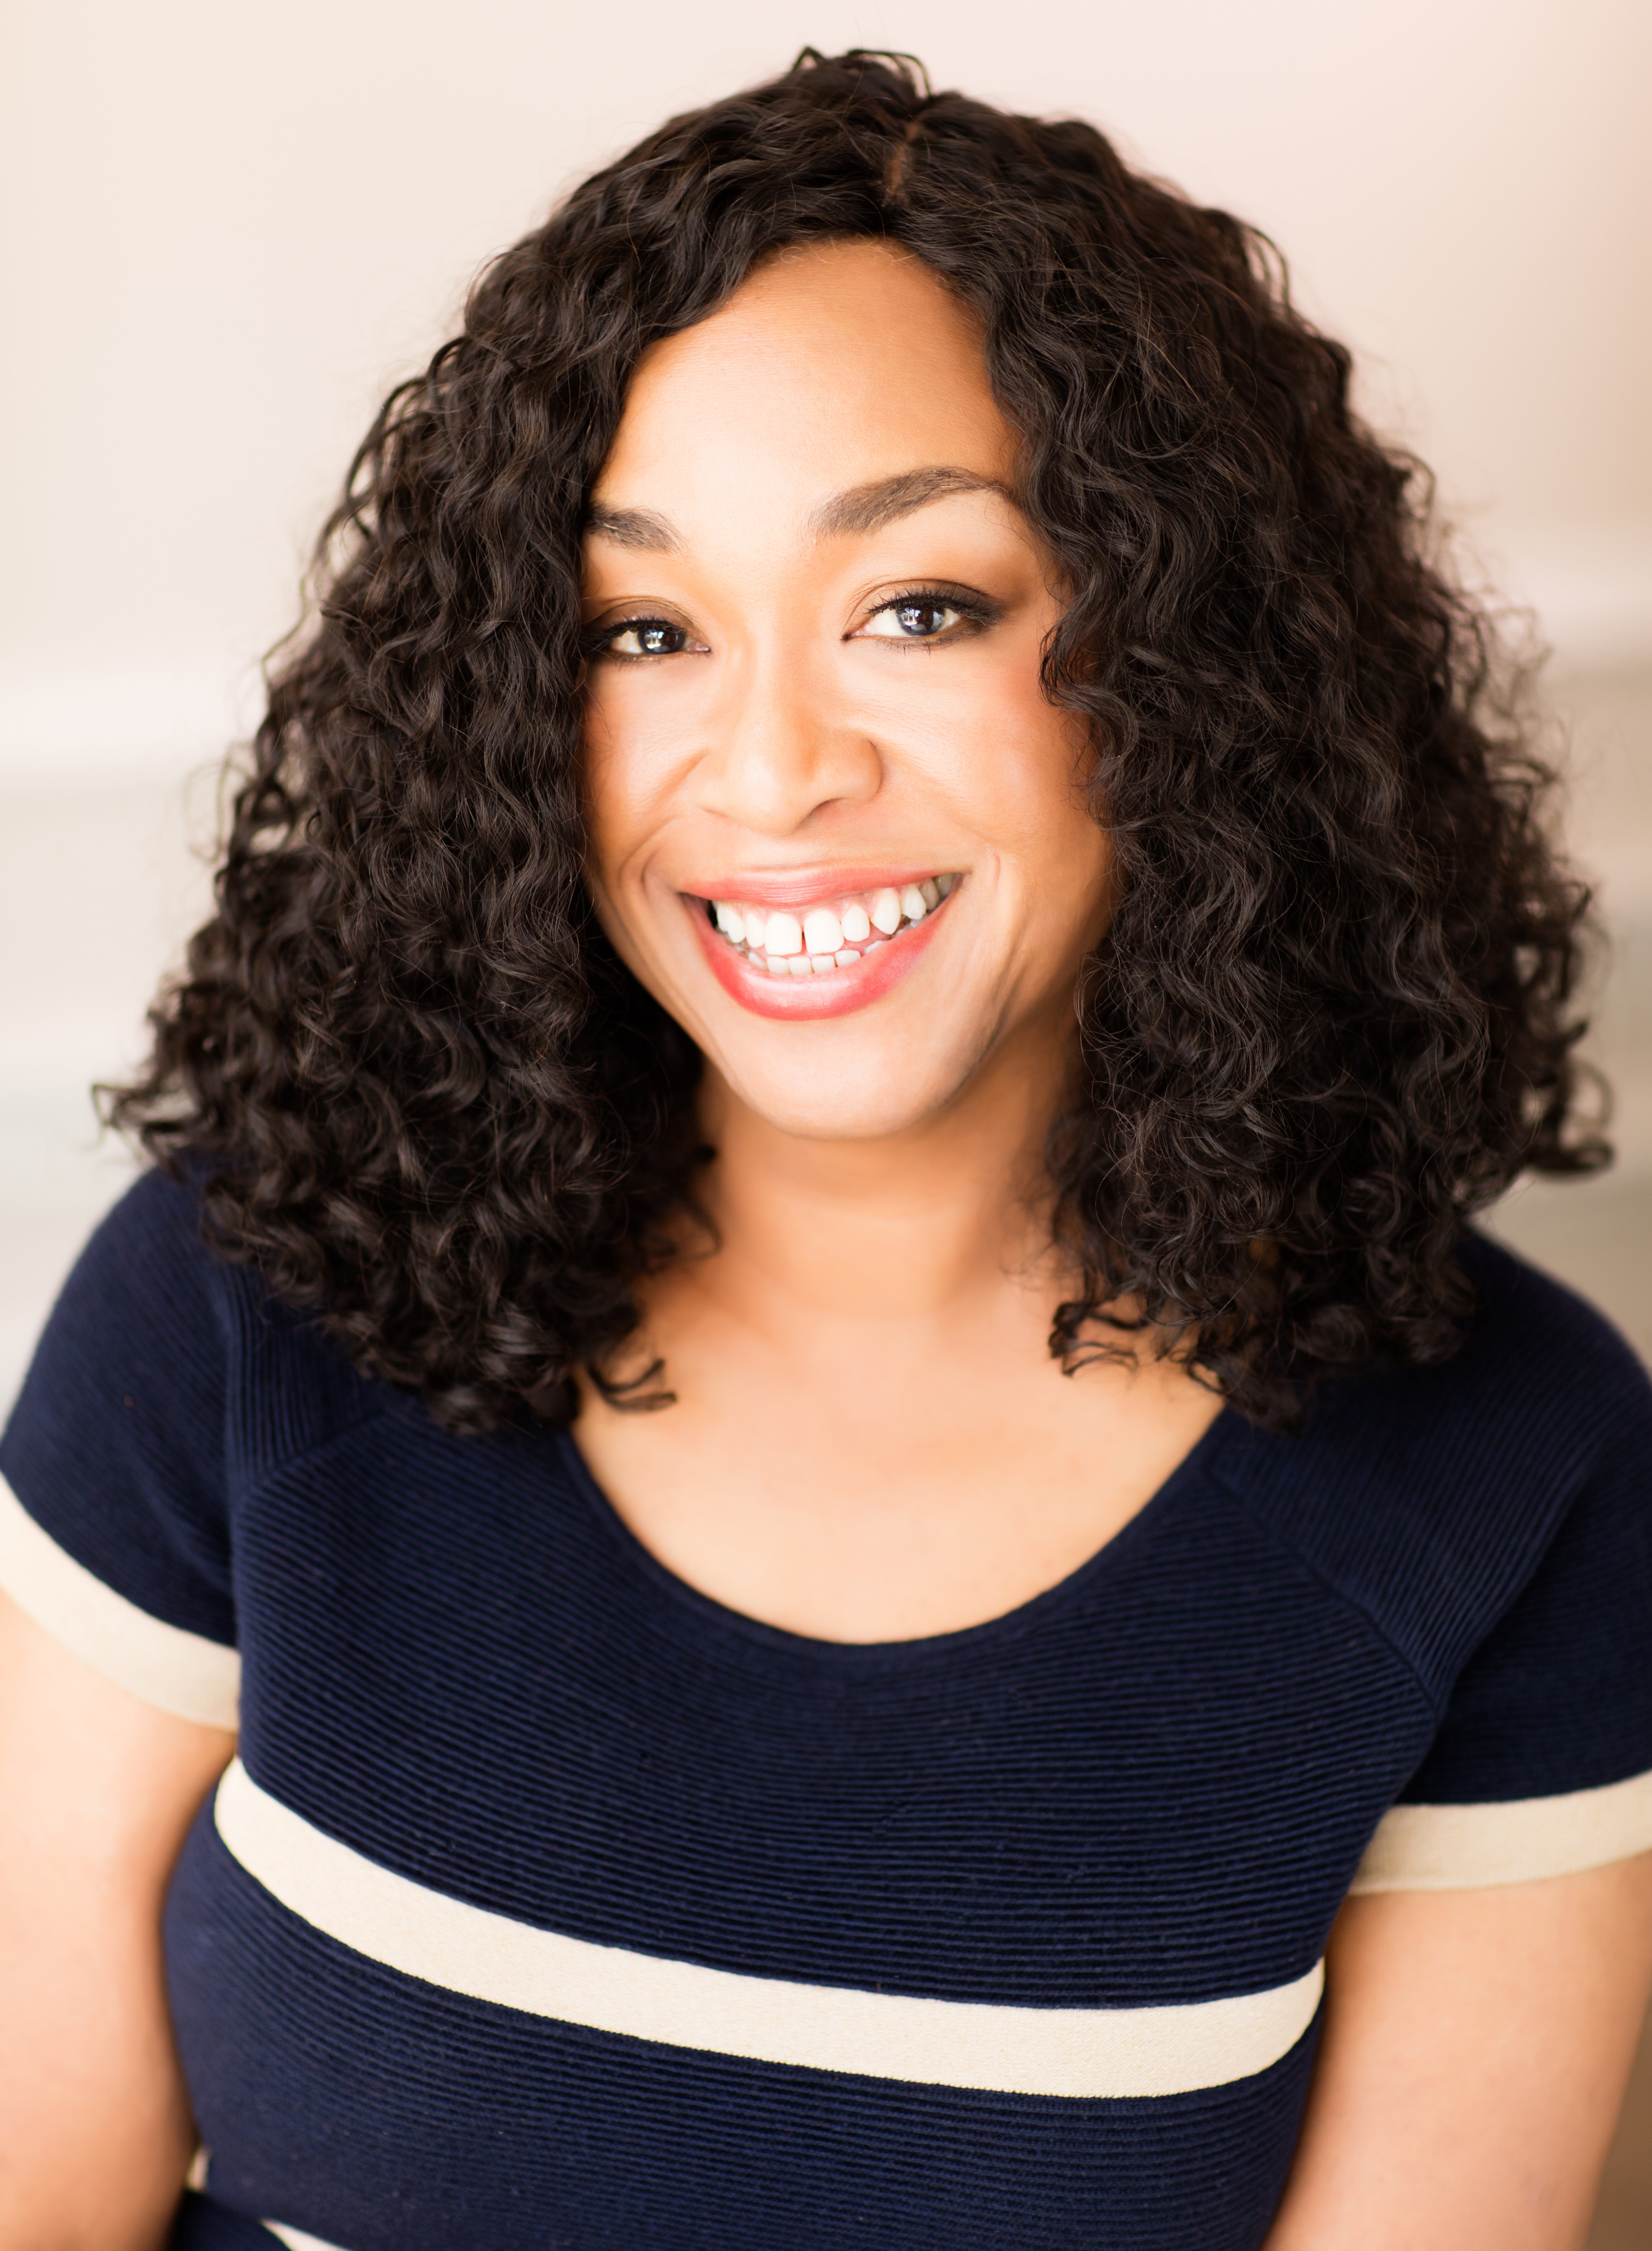 Shonda Rhimes Teams Up With Dove To Launch A Production Company Aimed At Showcasing Our True Beauty